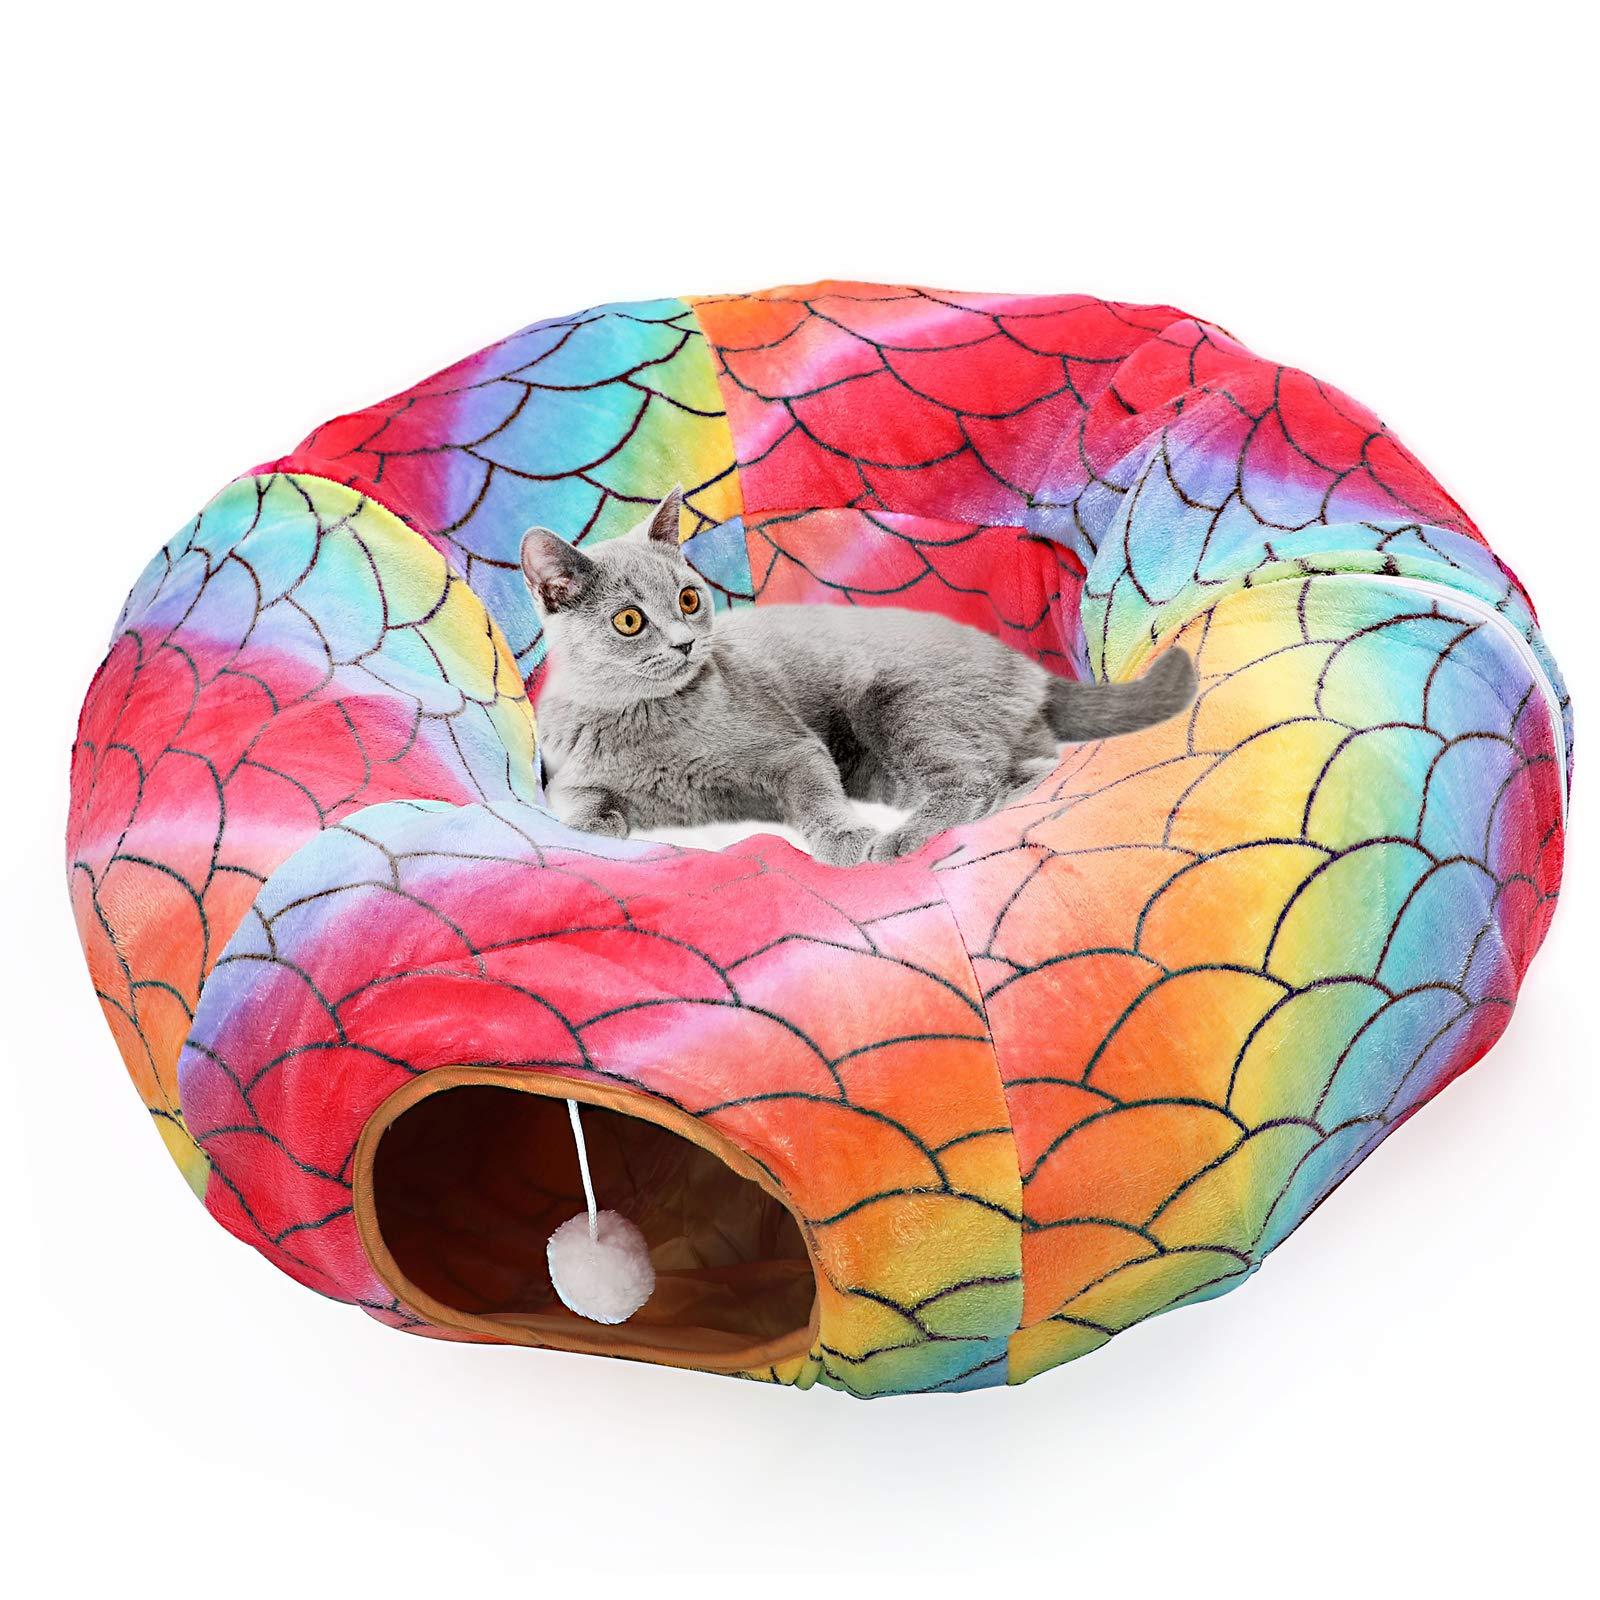 LUCKITTY Large Cat Dog Tunnel Bed with Washable Cushion-Big Tube Playground Toys Plush 3 FT Diameter Longer Crinkle Collapsible 3 Way,Gift for Small Medium Kitten Puppy Rabbit Ferret Outdoor Rainbow